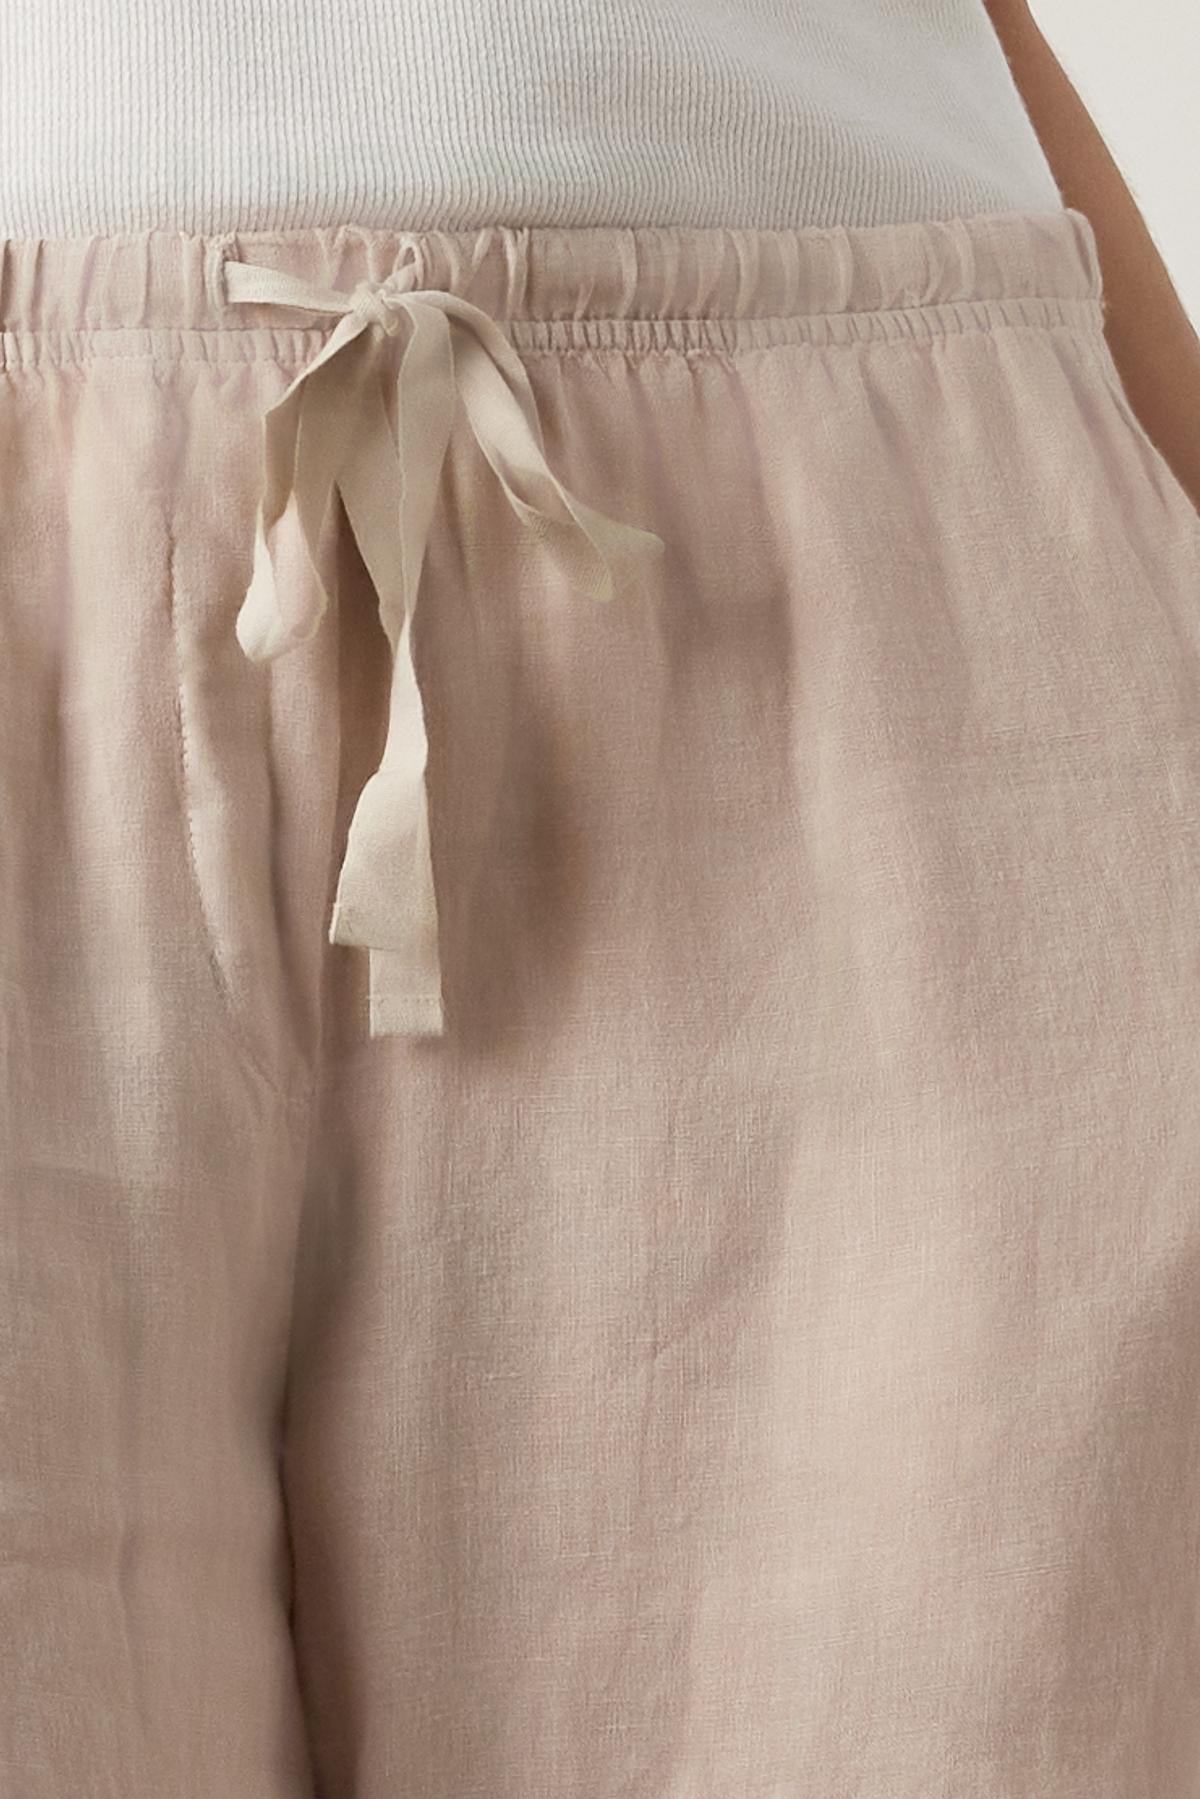 Close-up of a person wearing Velvet by Jenny Graham's PICO LINEN PANT in light pink with an elastic waist, focusing on the waist area.-36863287591105